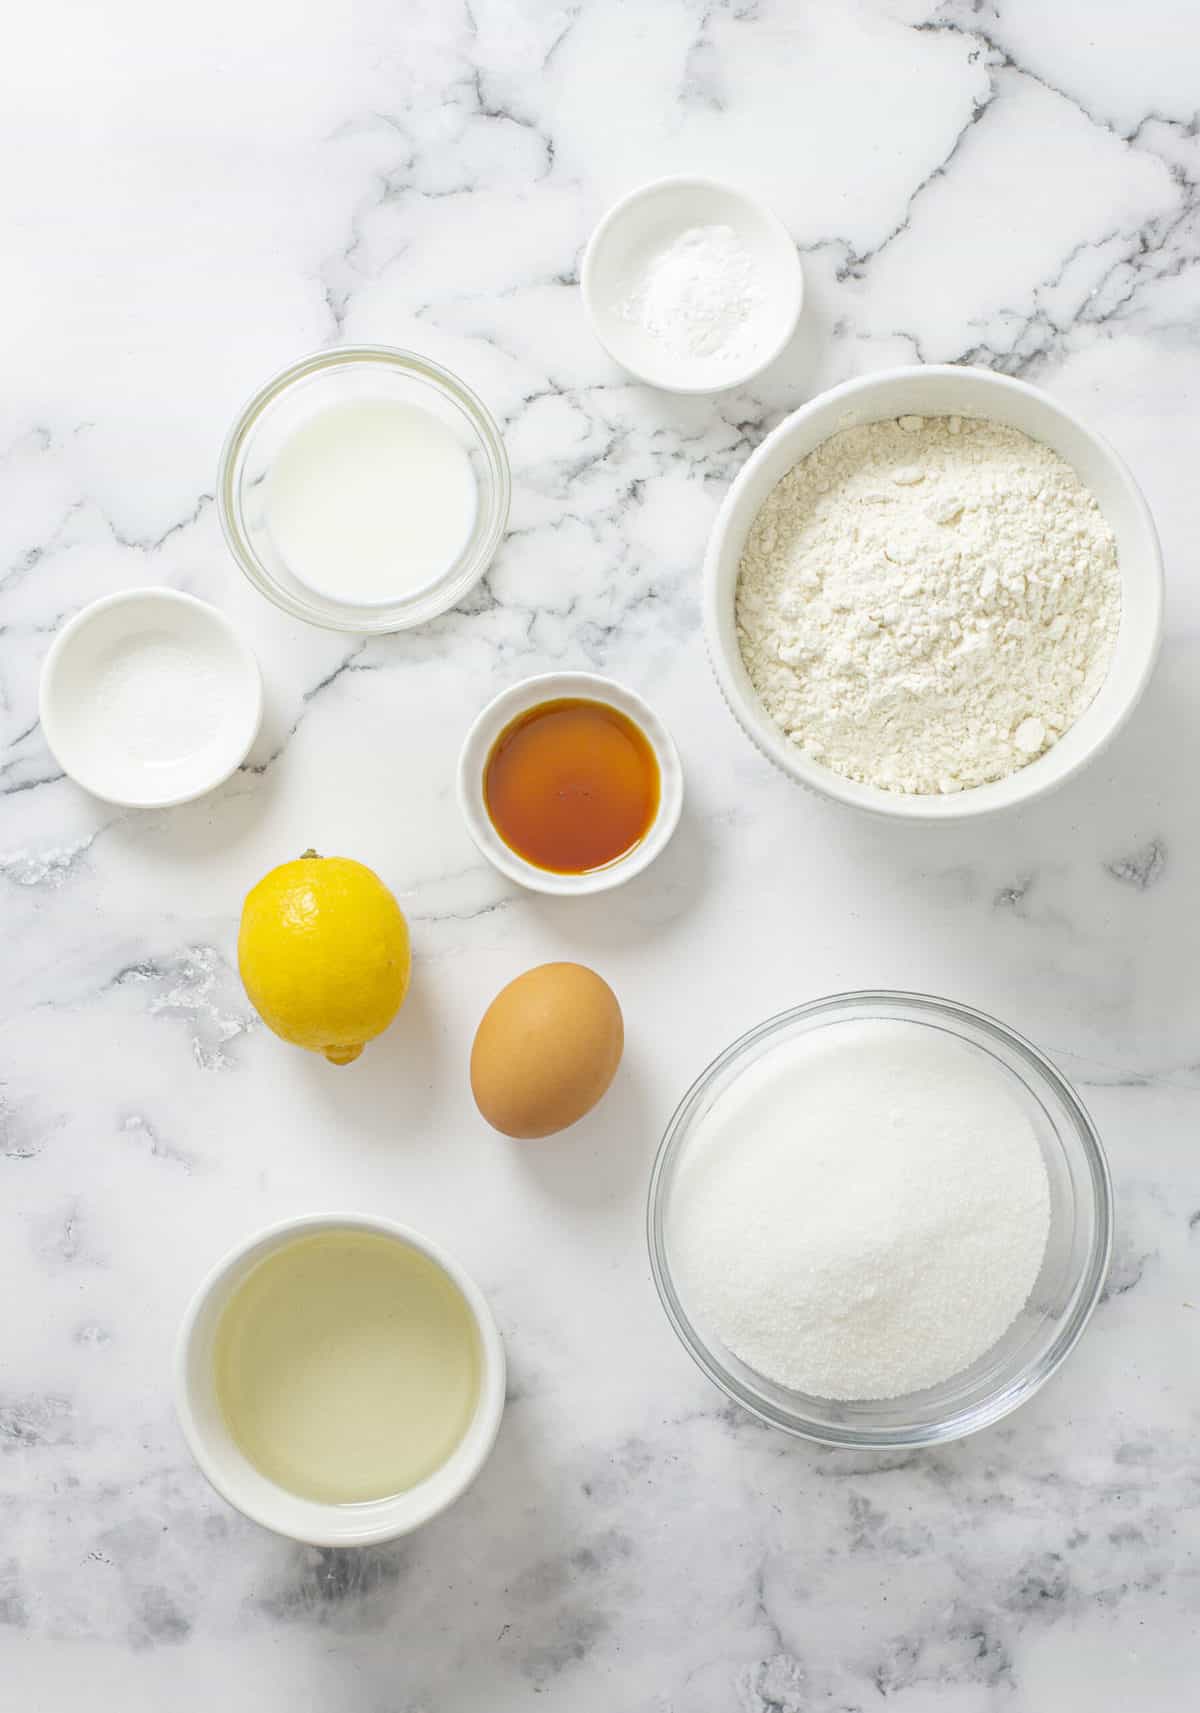 ingredients to make lemon muffins and glaze